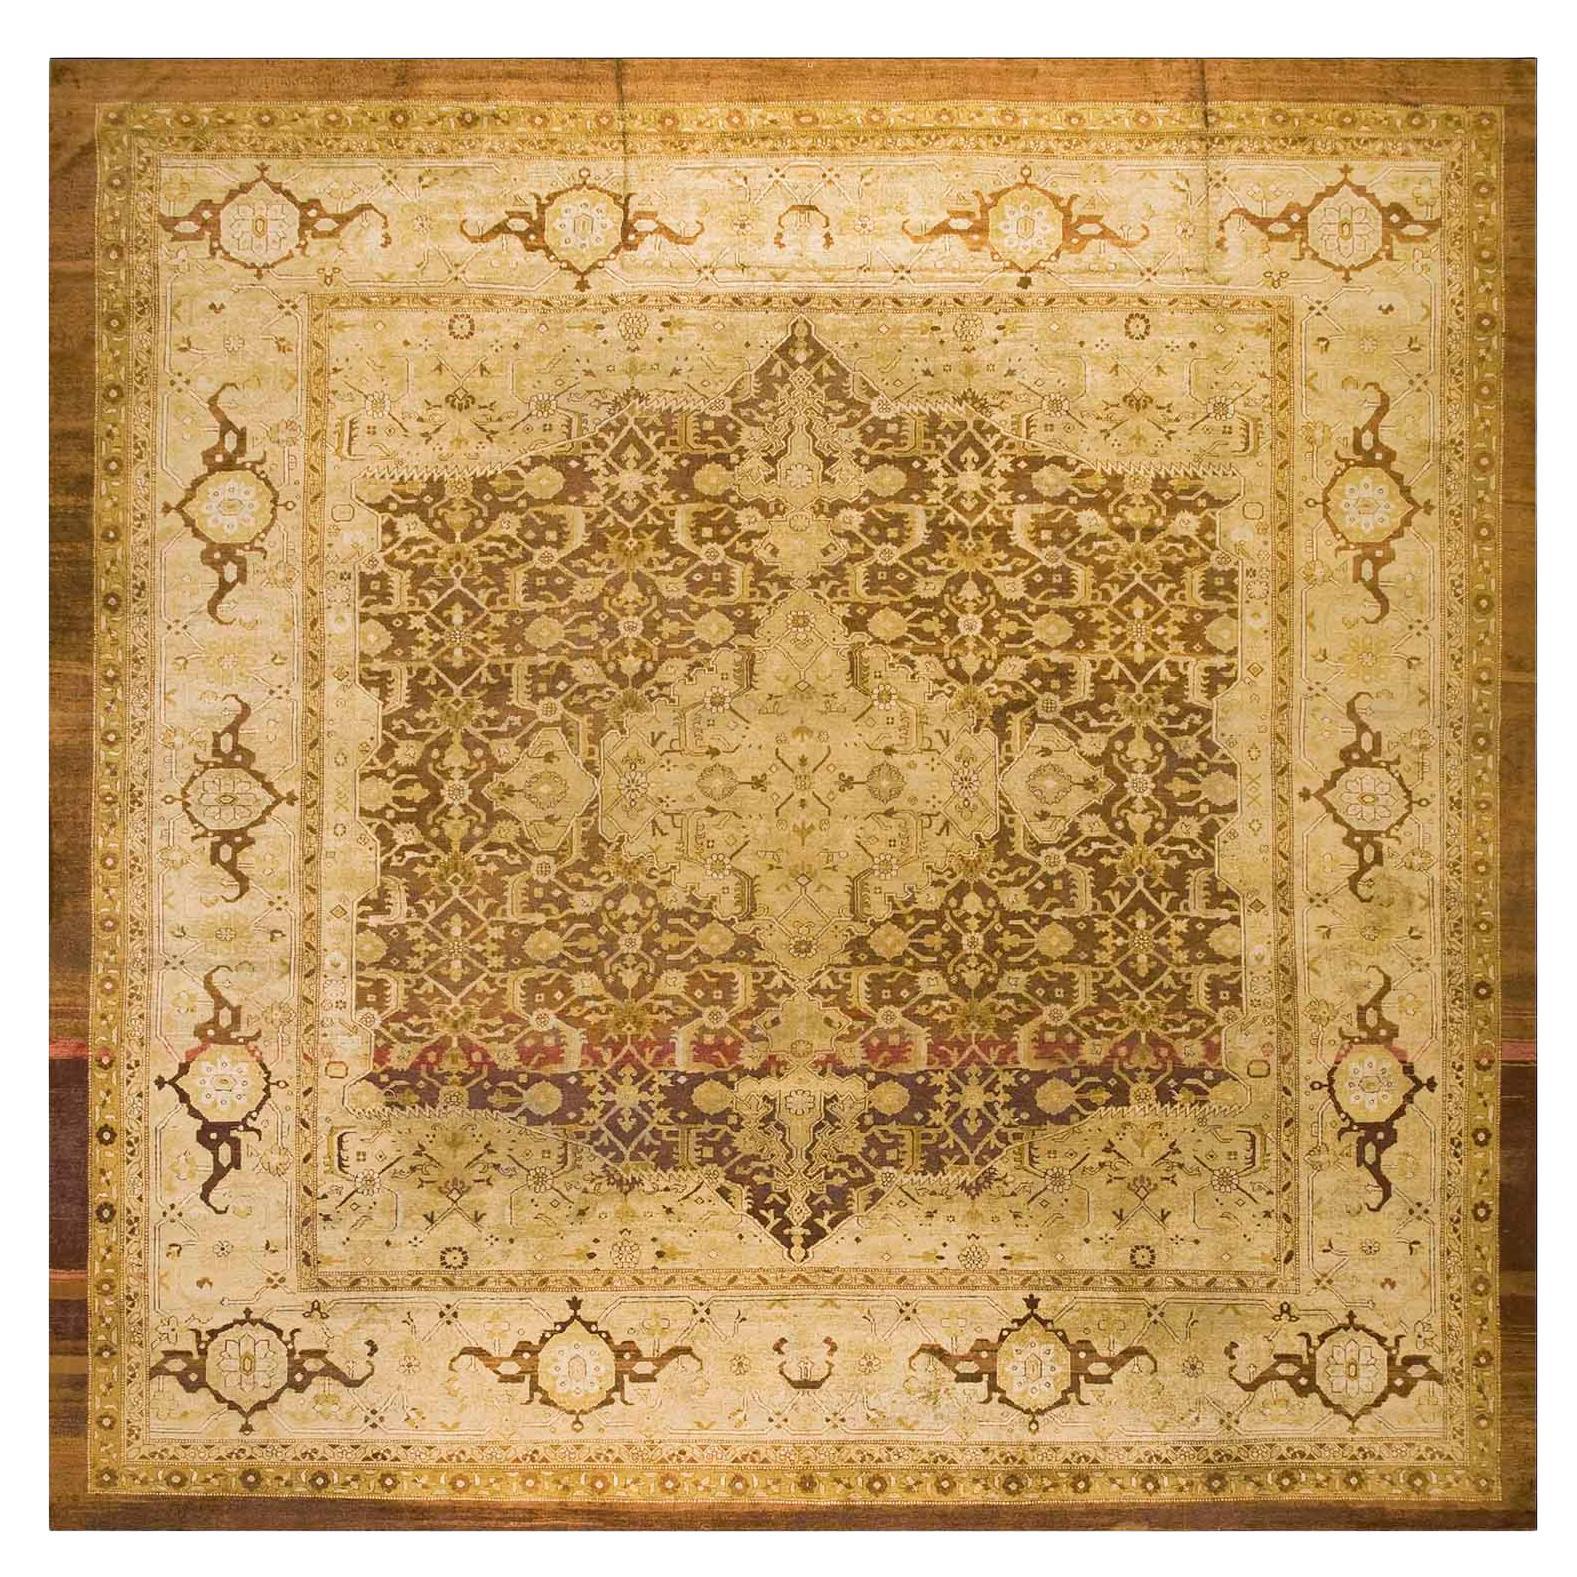 Early 20th Century N. Indian Agra Carpet ( 14' X 14' - 427 x 427 ) For Sale